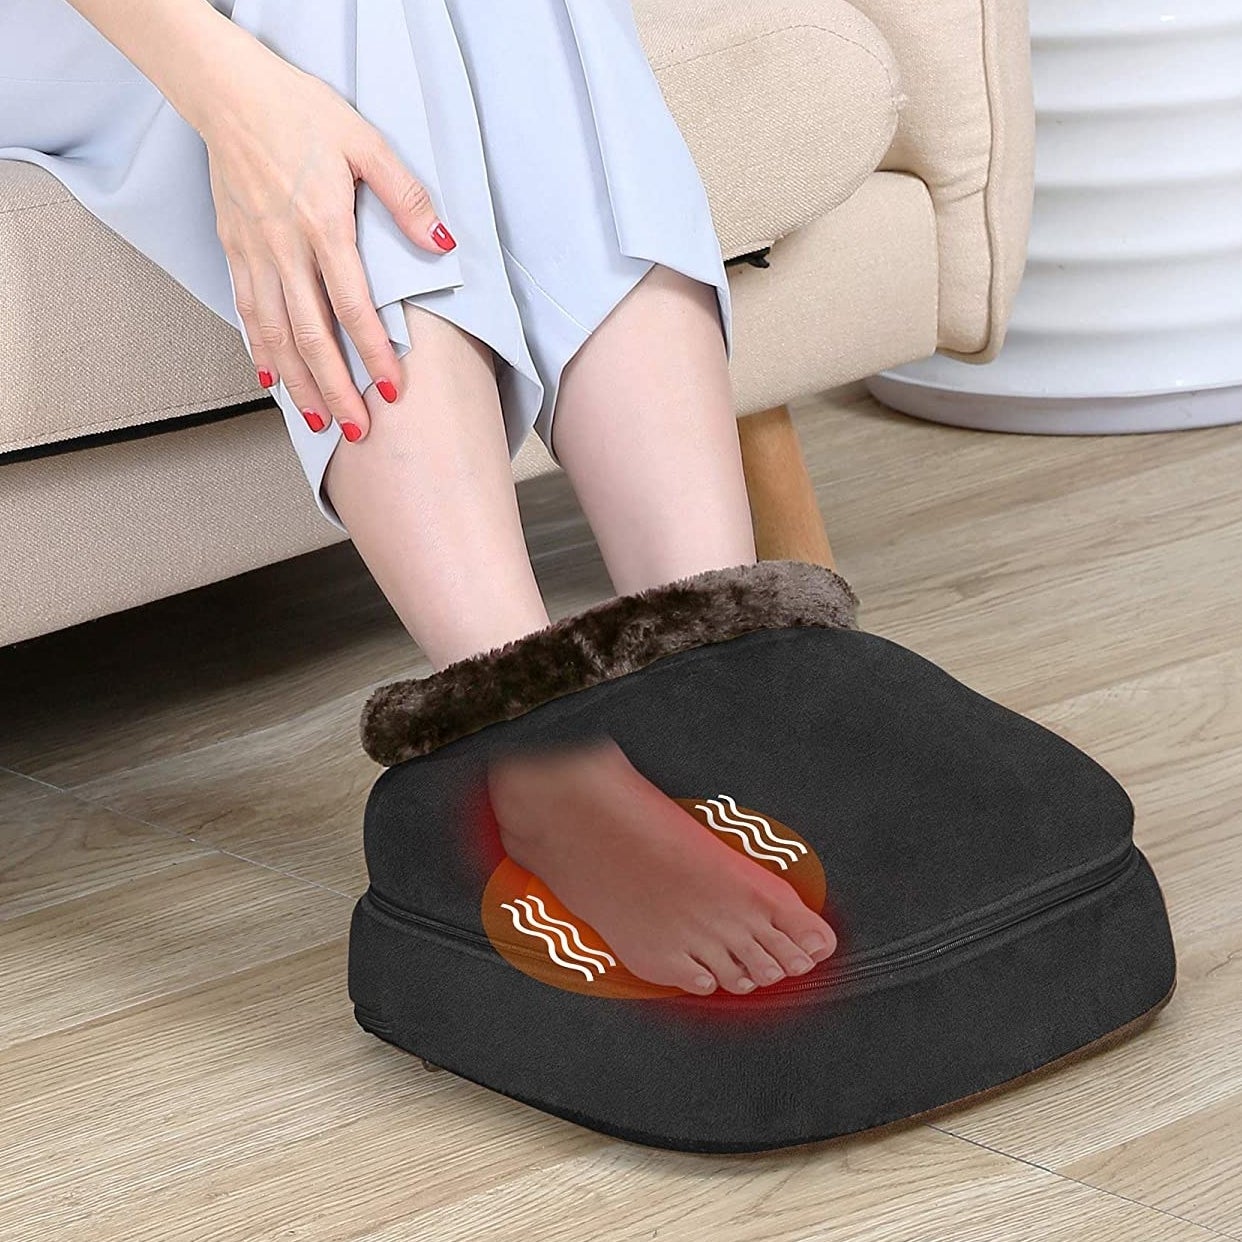 someone inserting their foot into the vibrating and heating foot massager